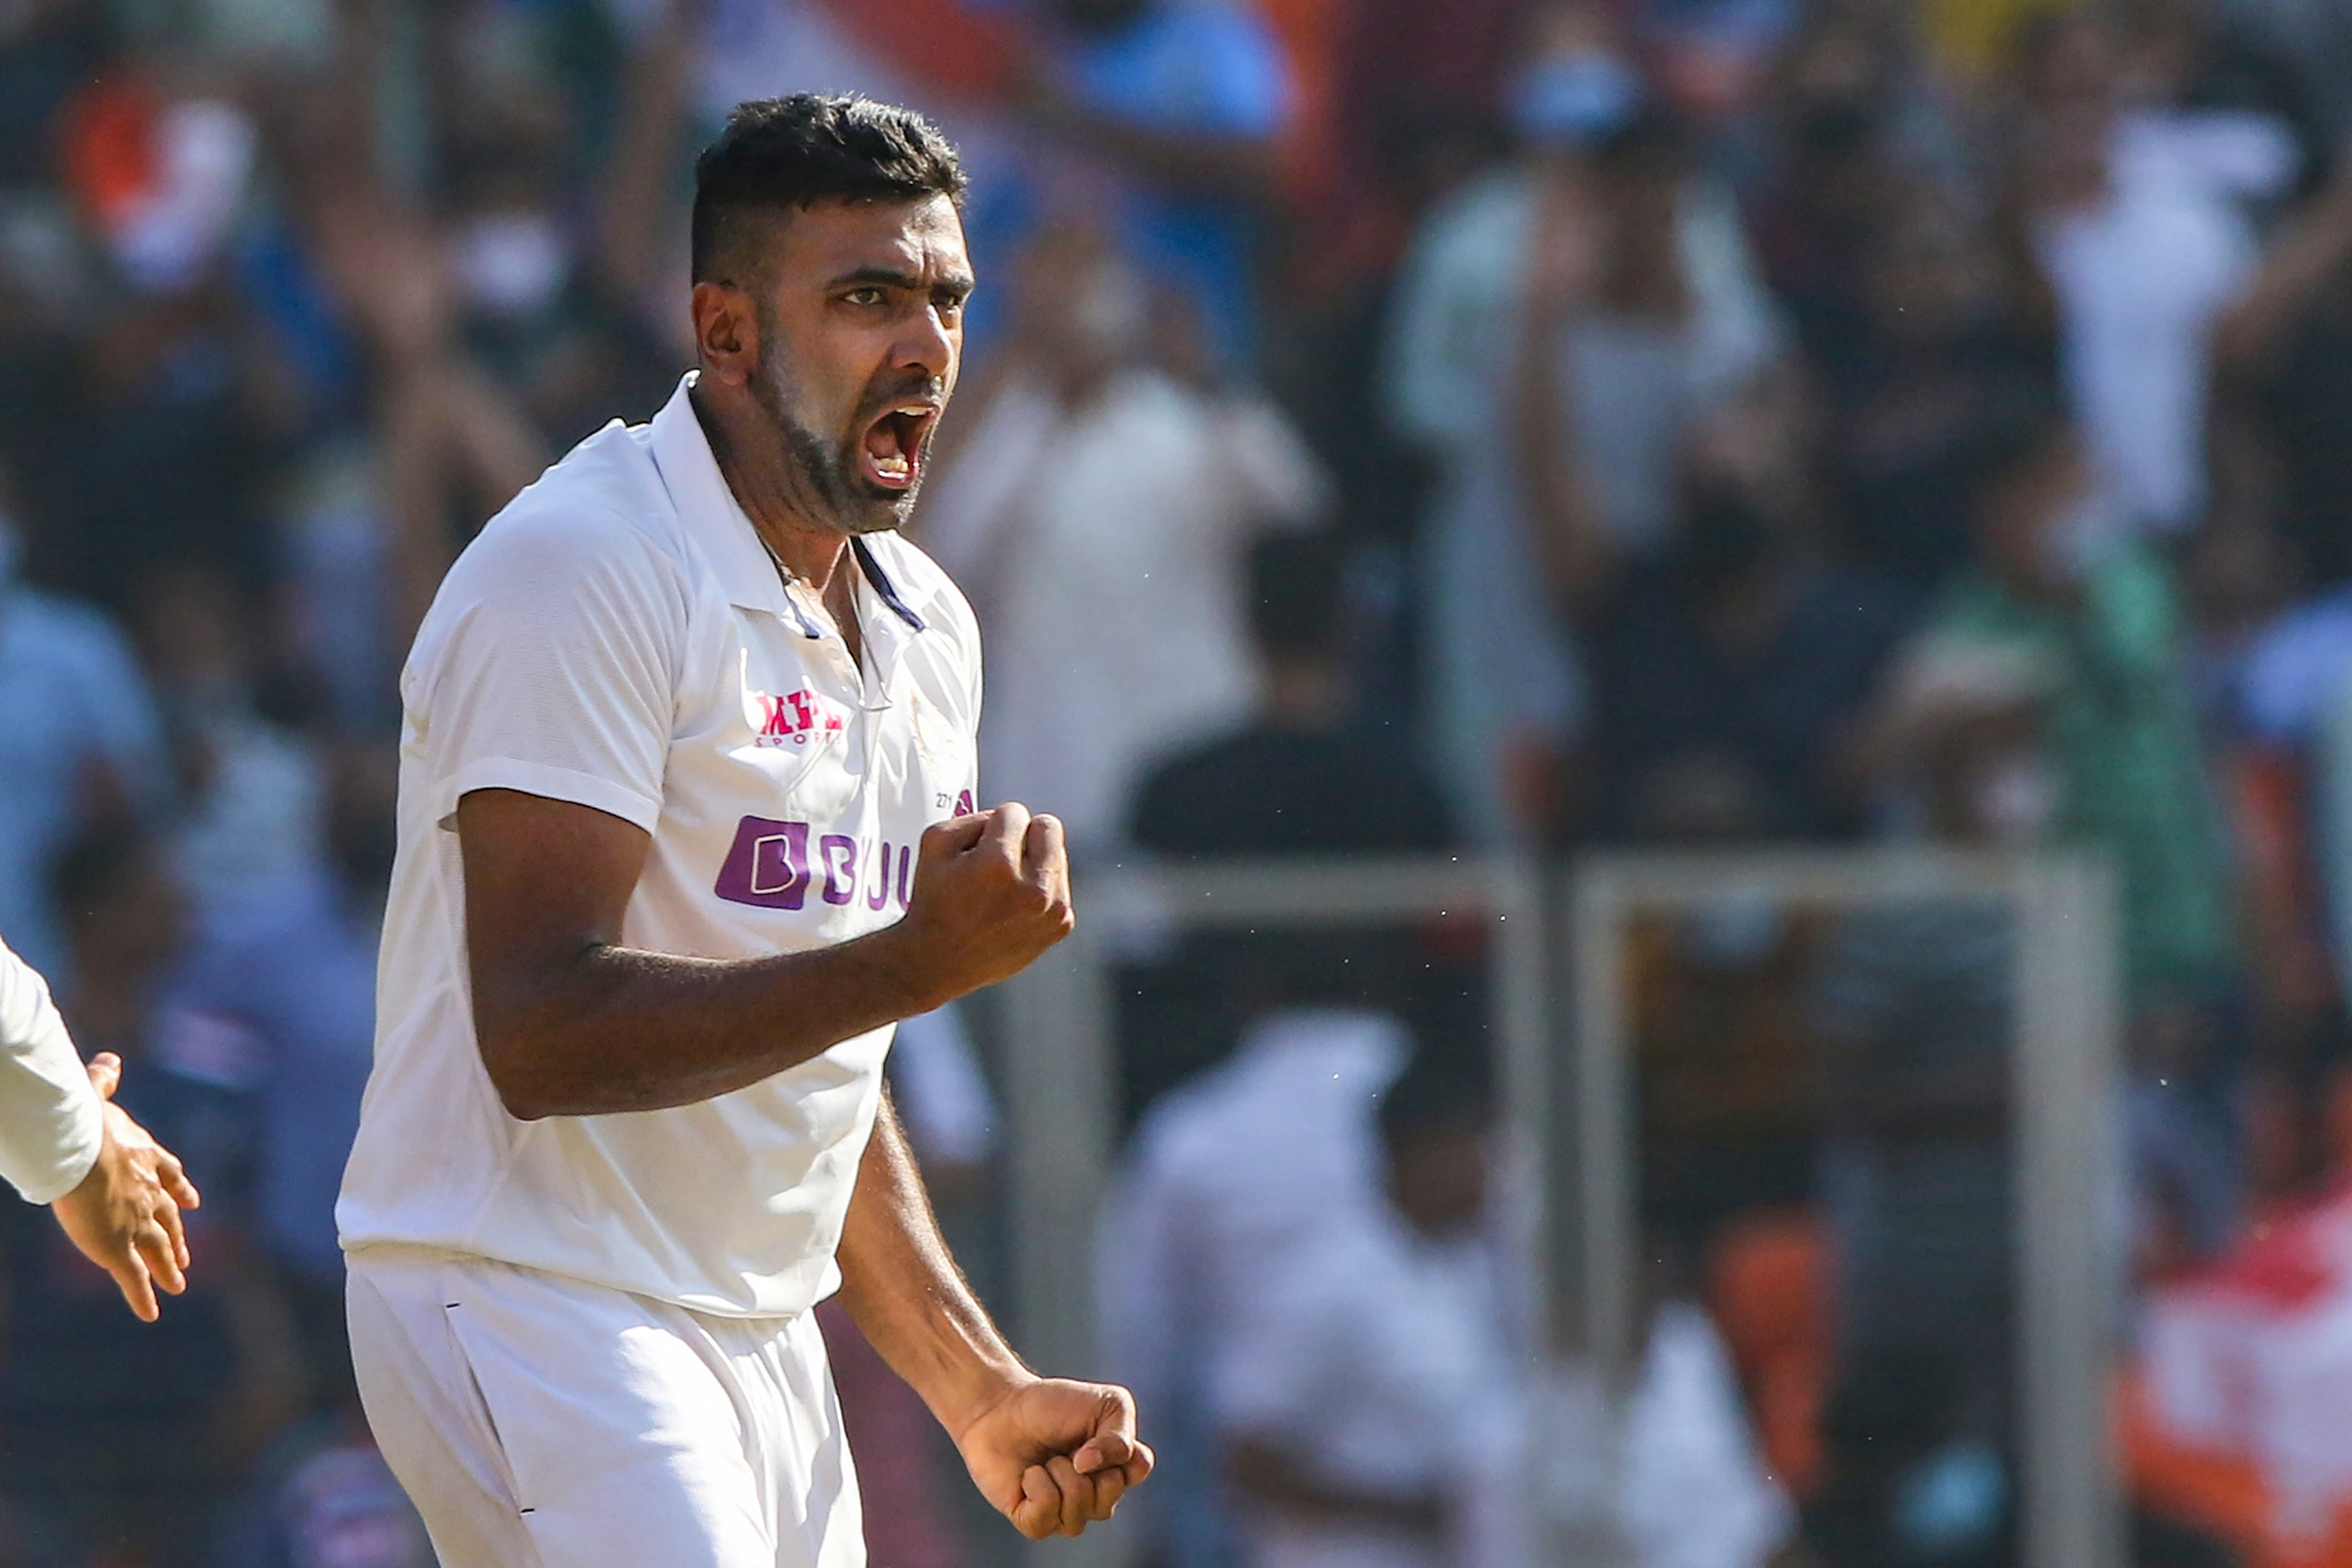 Indian bowler R Ashwin celebrates the dismissal of England's J Leach on the first day of the 3rd cricket test match between India and England, at Narendra Modi Stadium in Ahmedabad, Wednesday, Feb. 24, 2021. Credit: PTI Photo